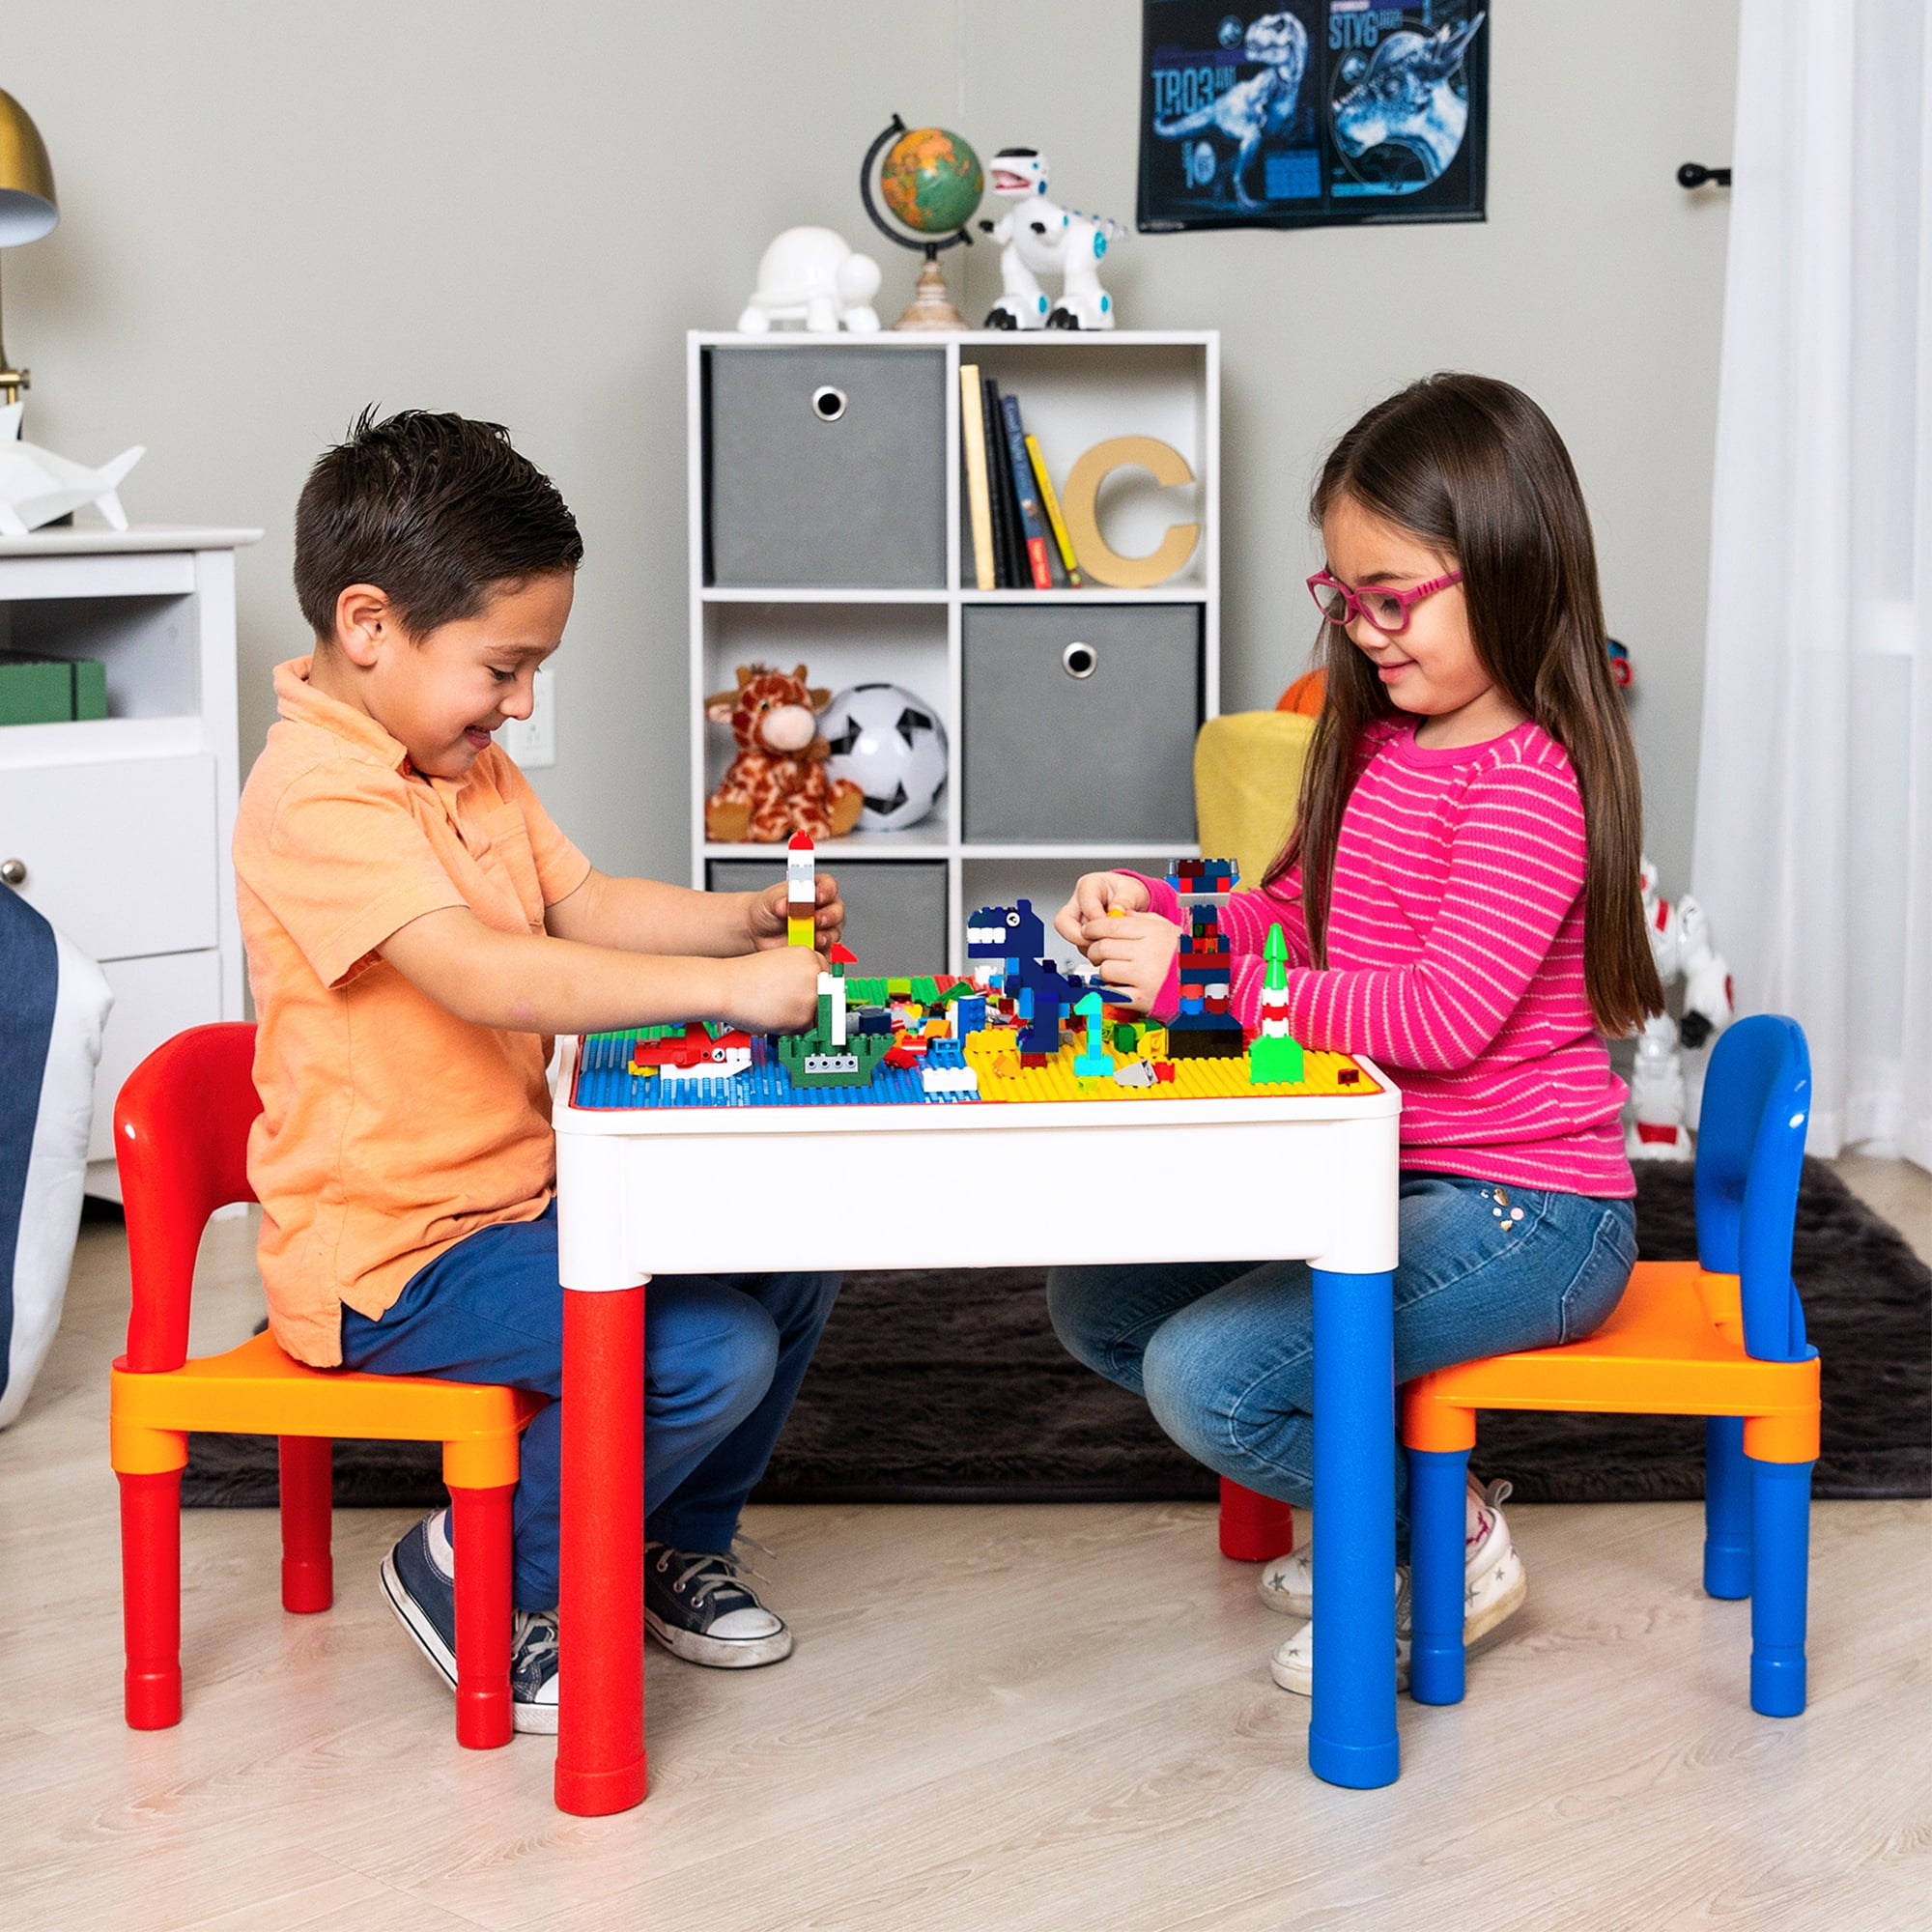 7 in 1 Multi Kids Activity Table Set with Classic Blocks and Slides Water Table Sand Table Dining Table Study Table Storage Table Building Blocks Table with 4 Storage Boxes 2 chair +250 Pcs Blocks